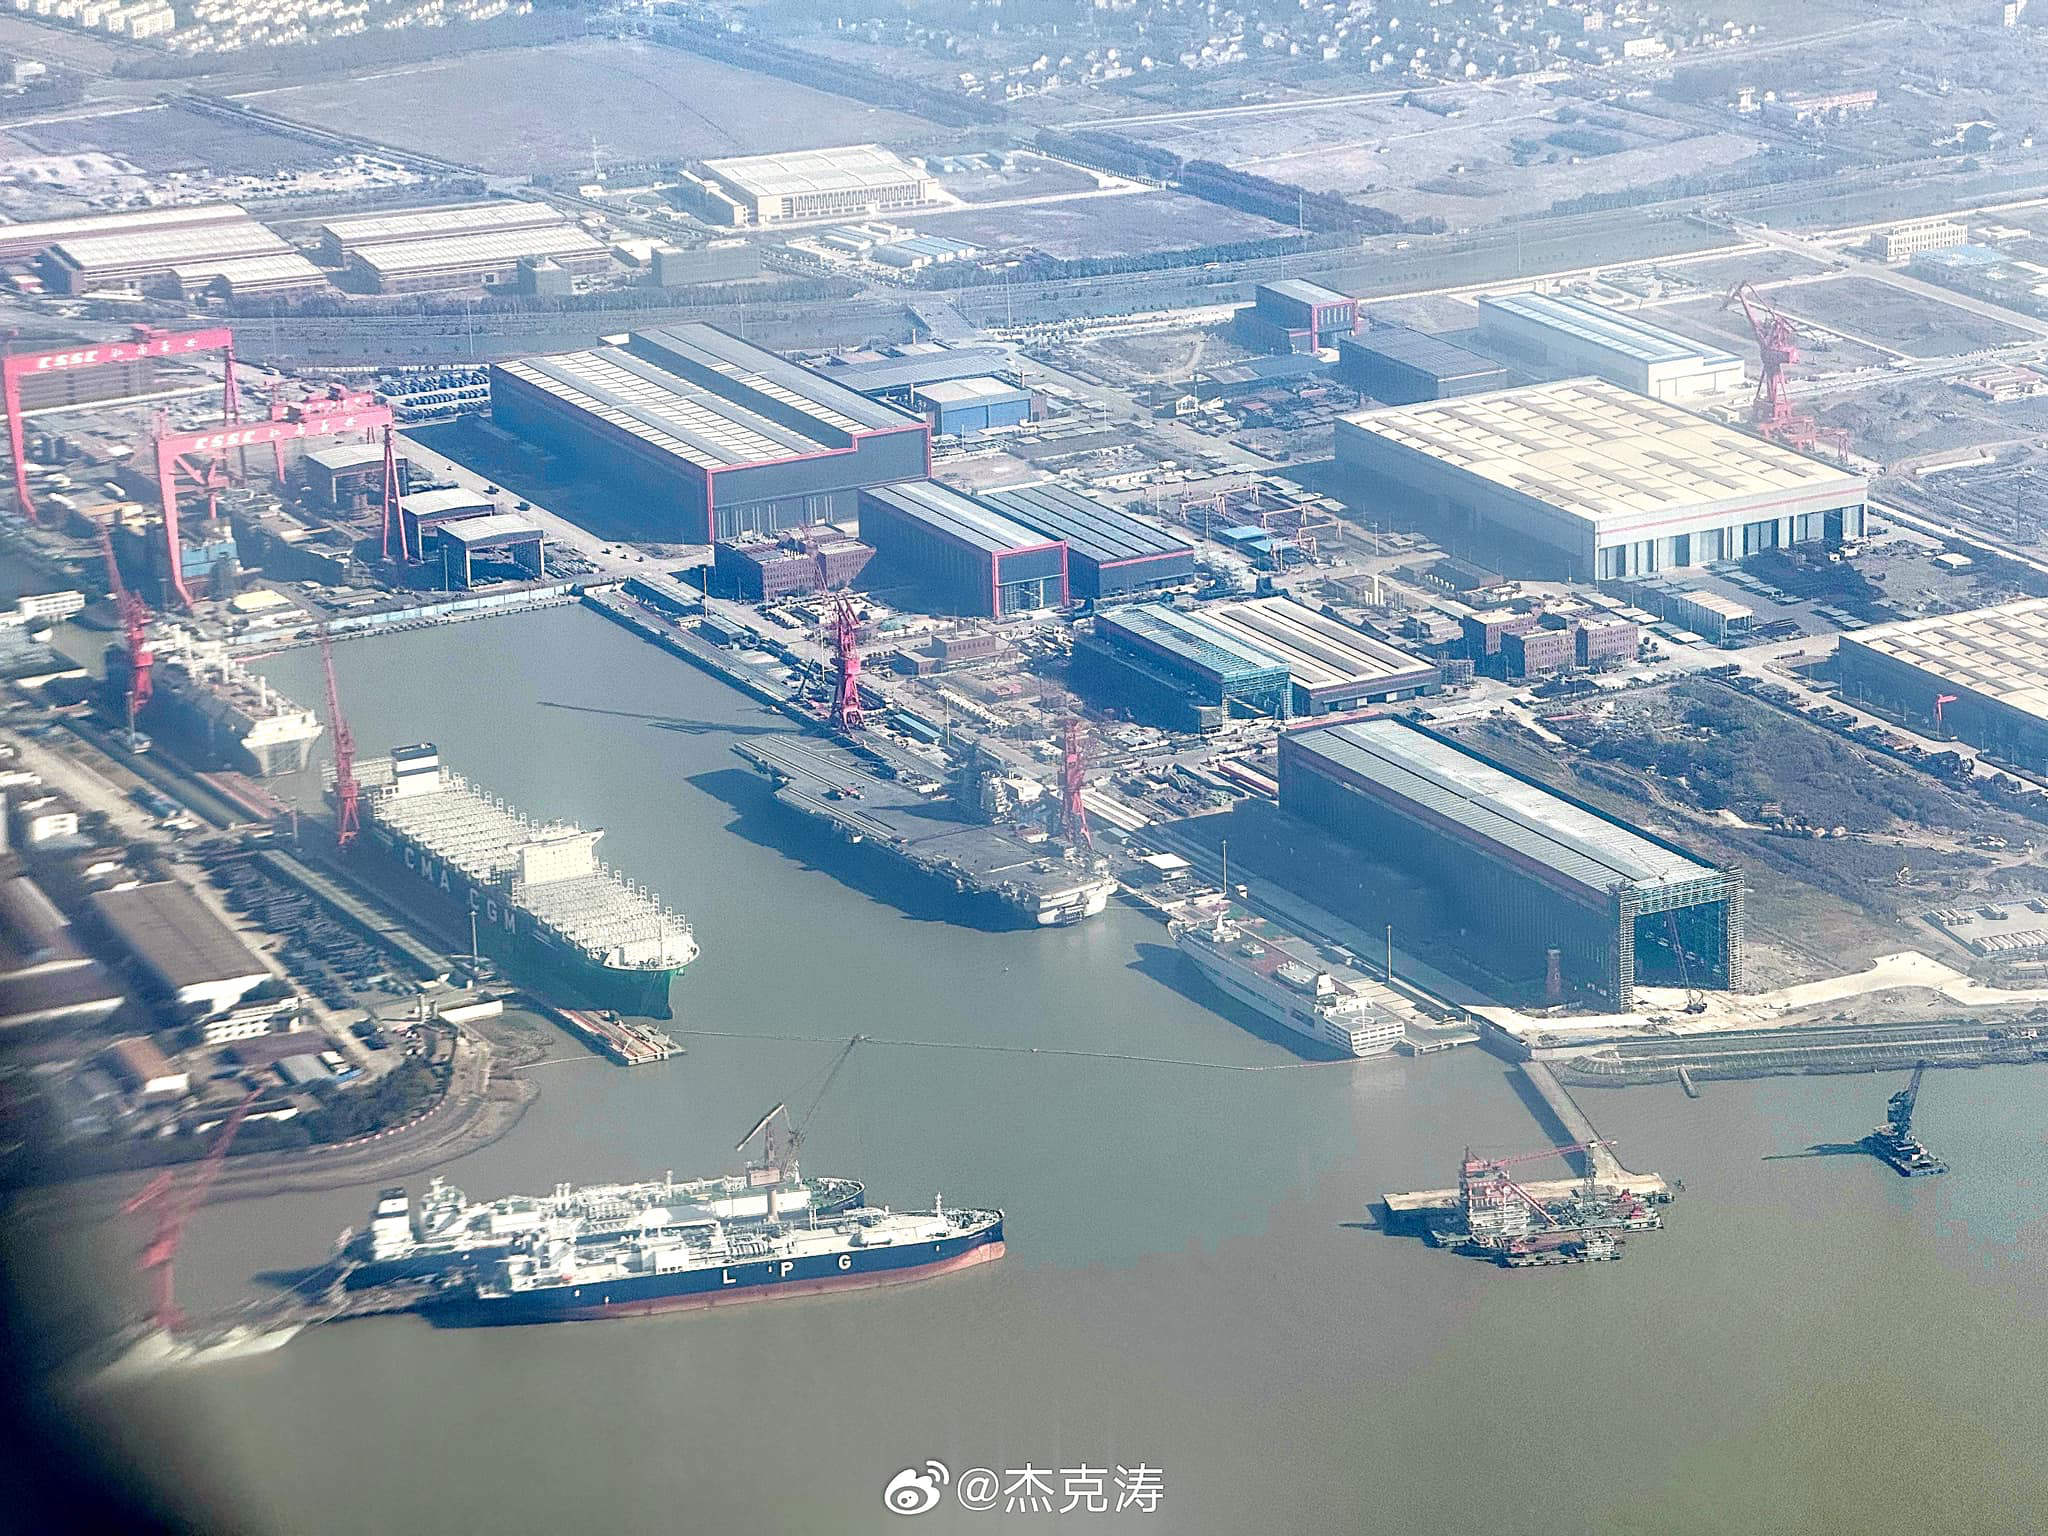 China Releases New Images of Third Aircraft Carrier Fujian